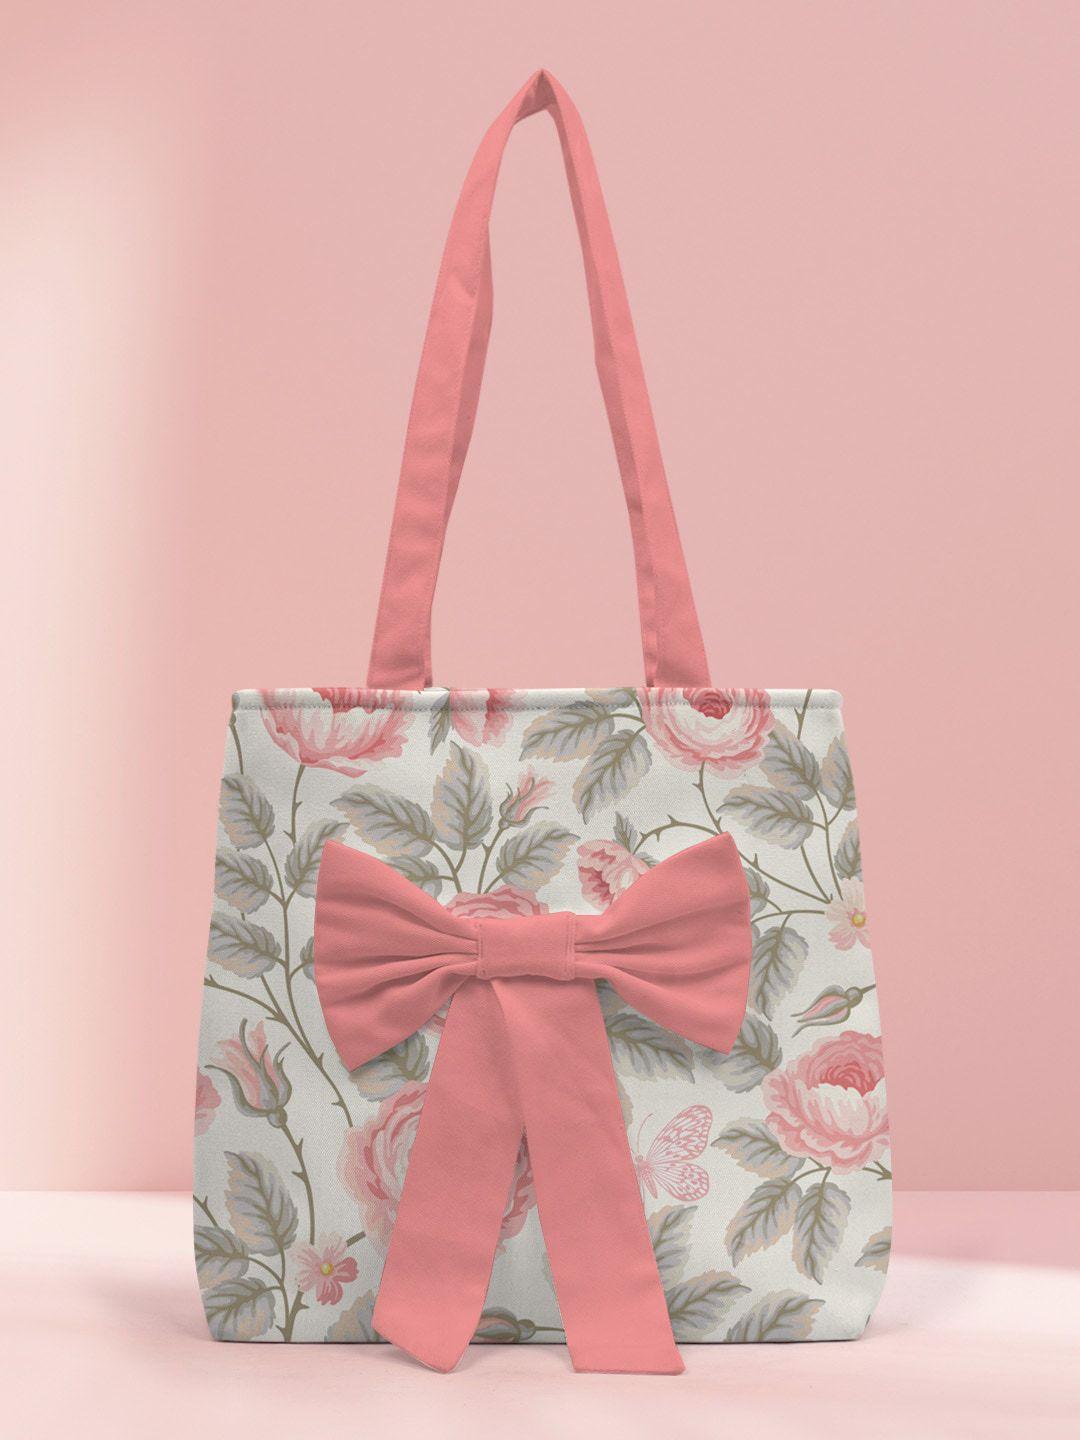 crazy corner women floral printed shopper tote bag with bow detail